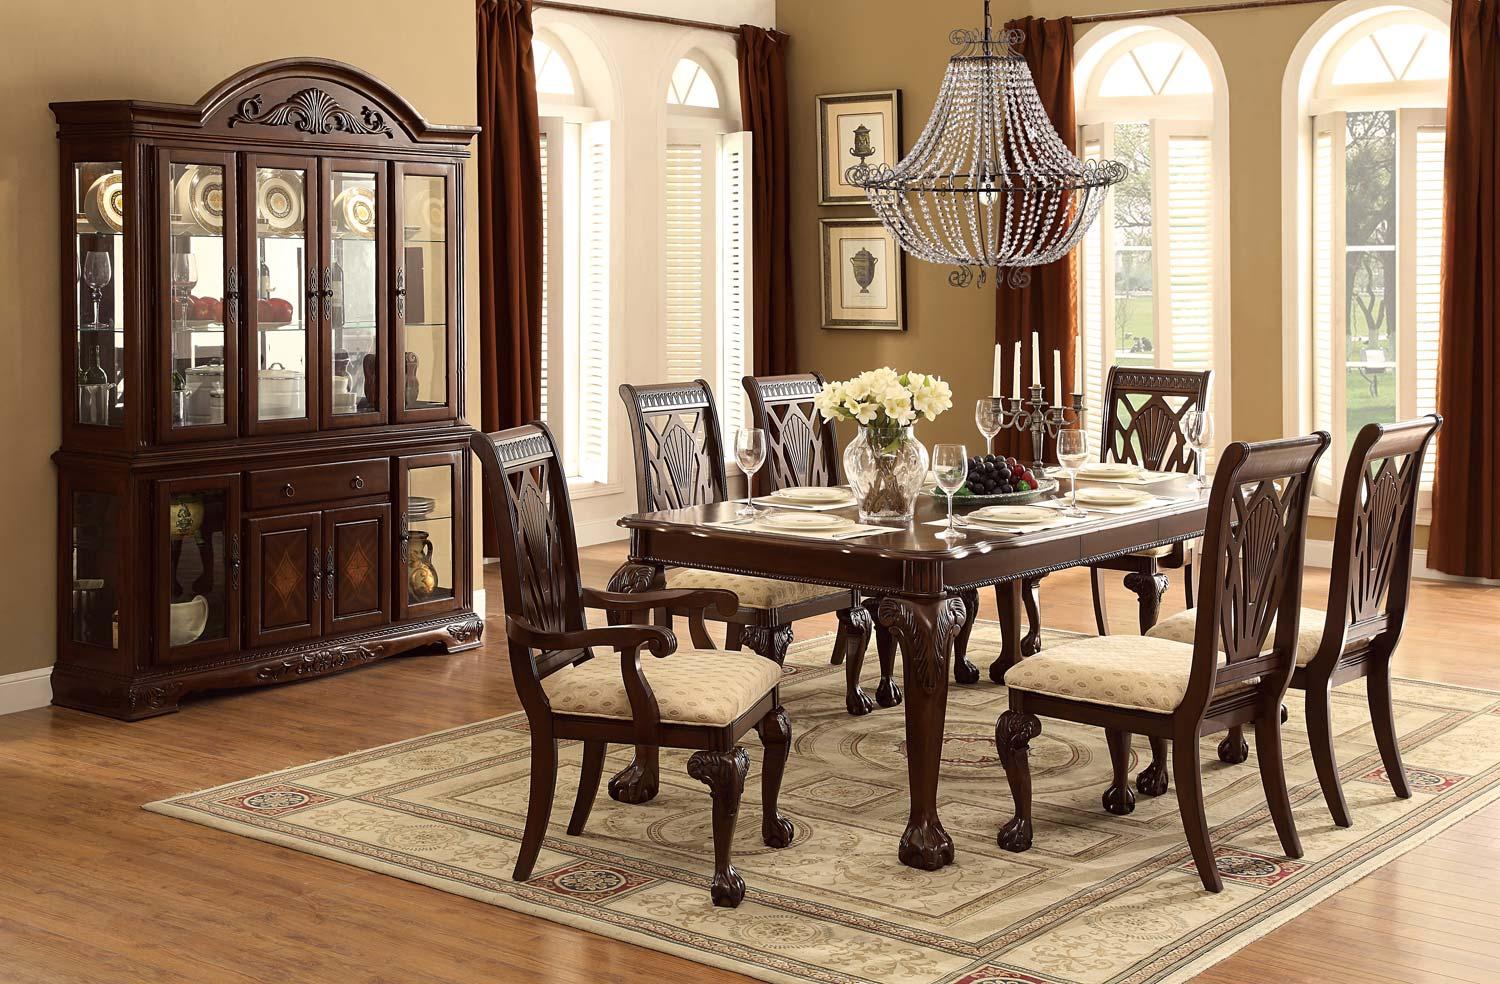 Traditional Dining Room Set 5055-82*8PC Norwich 5055-82*8PC in Dark Cherry Polyester